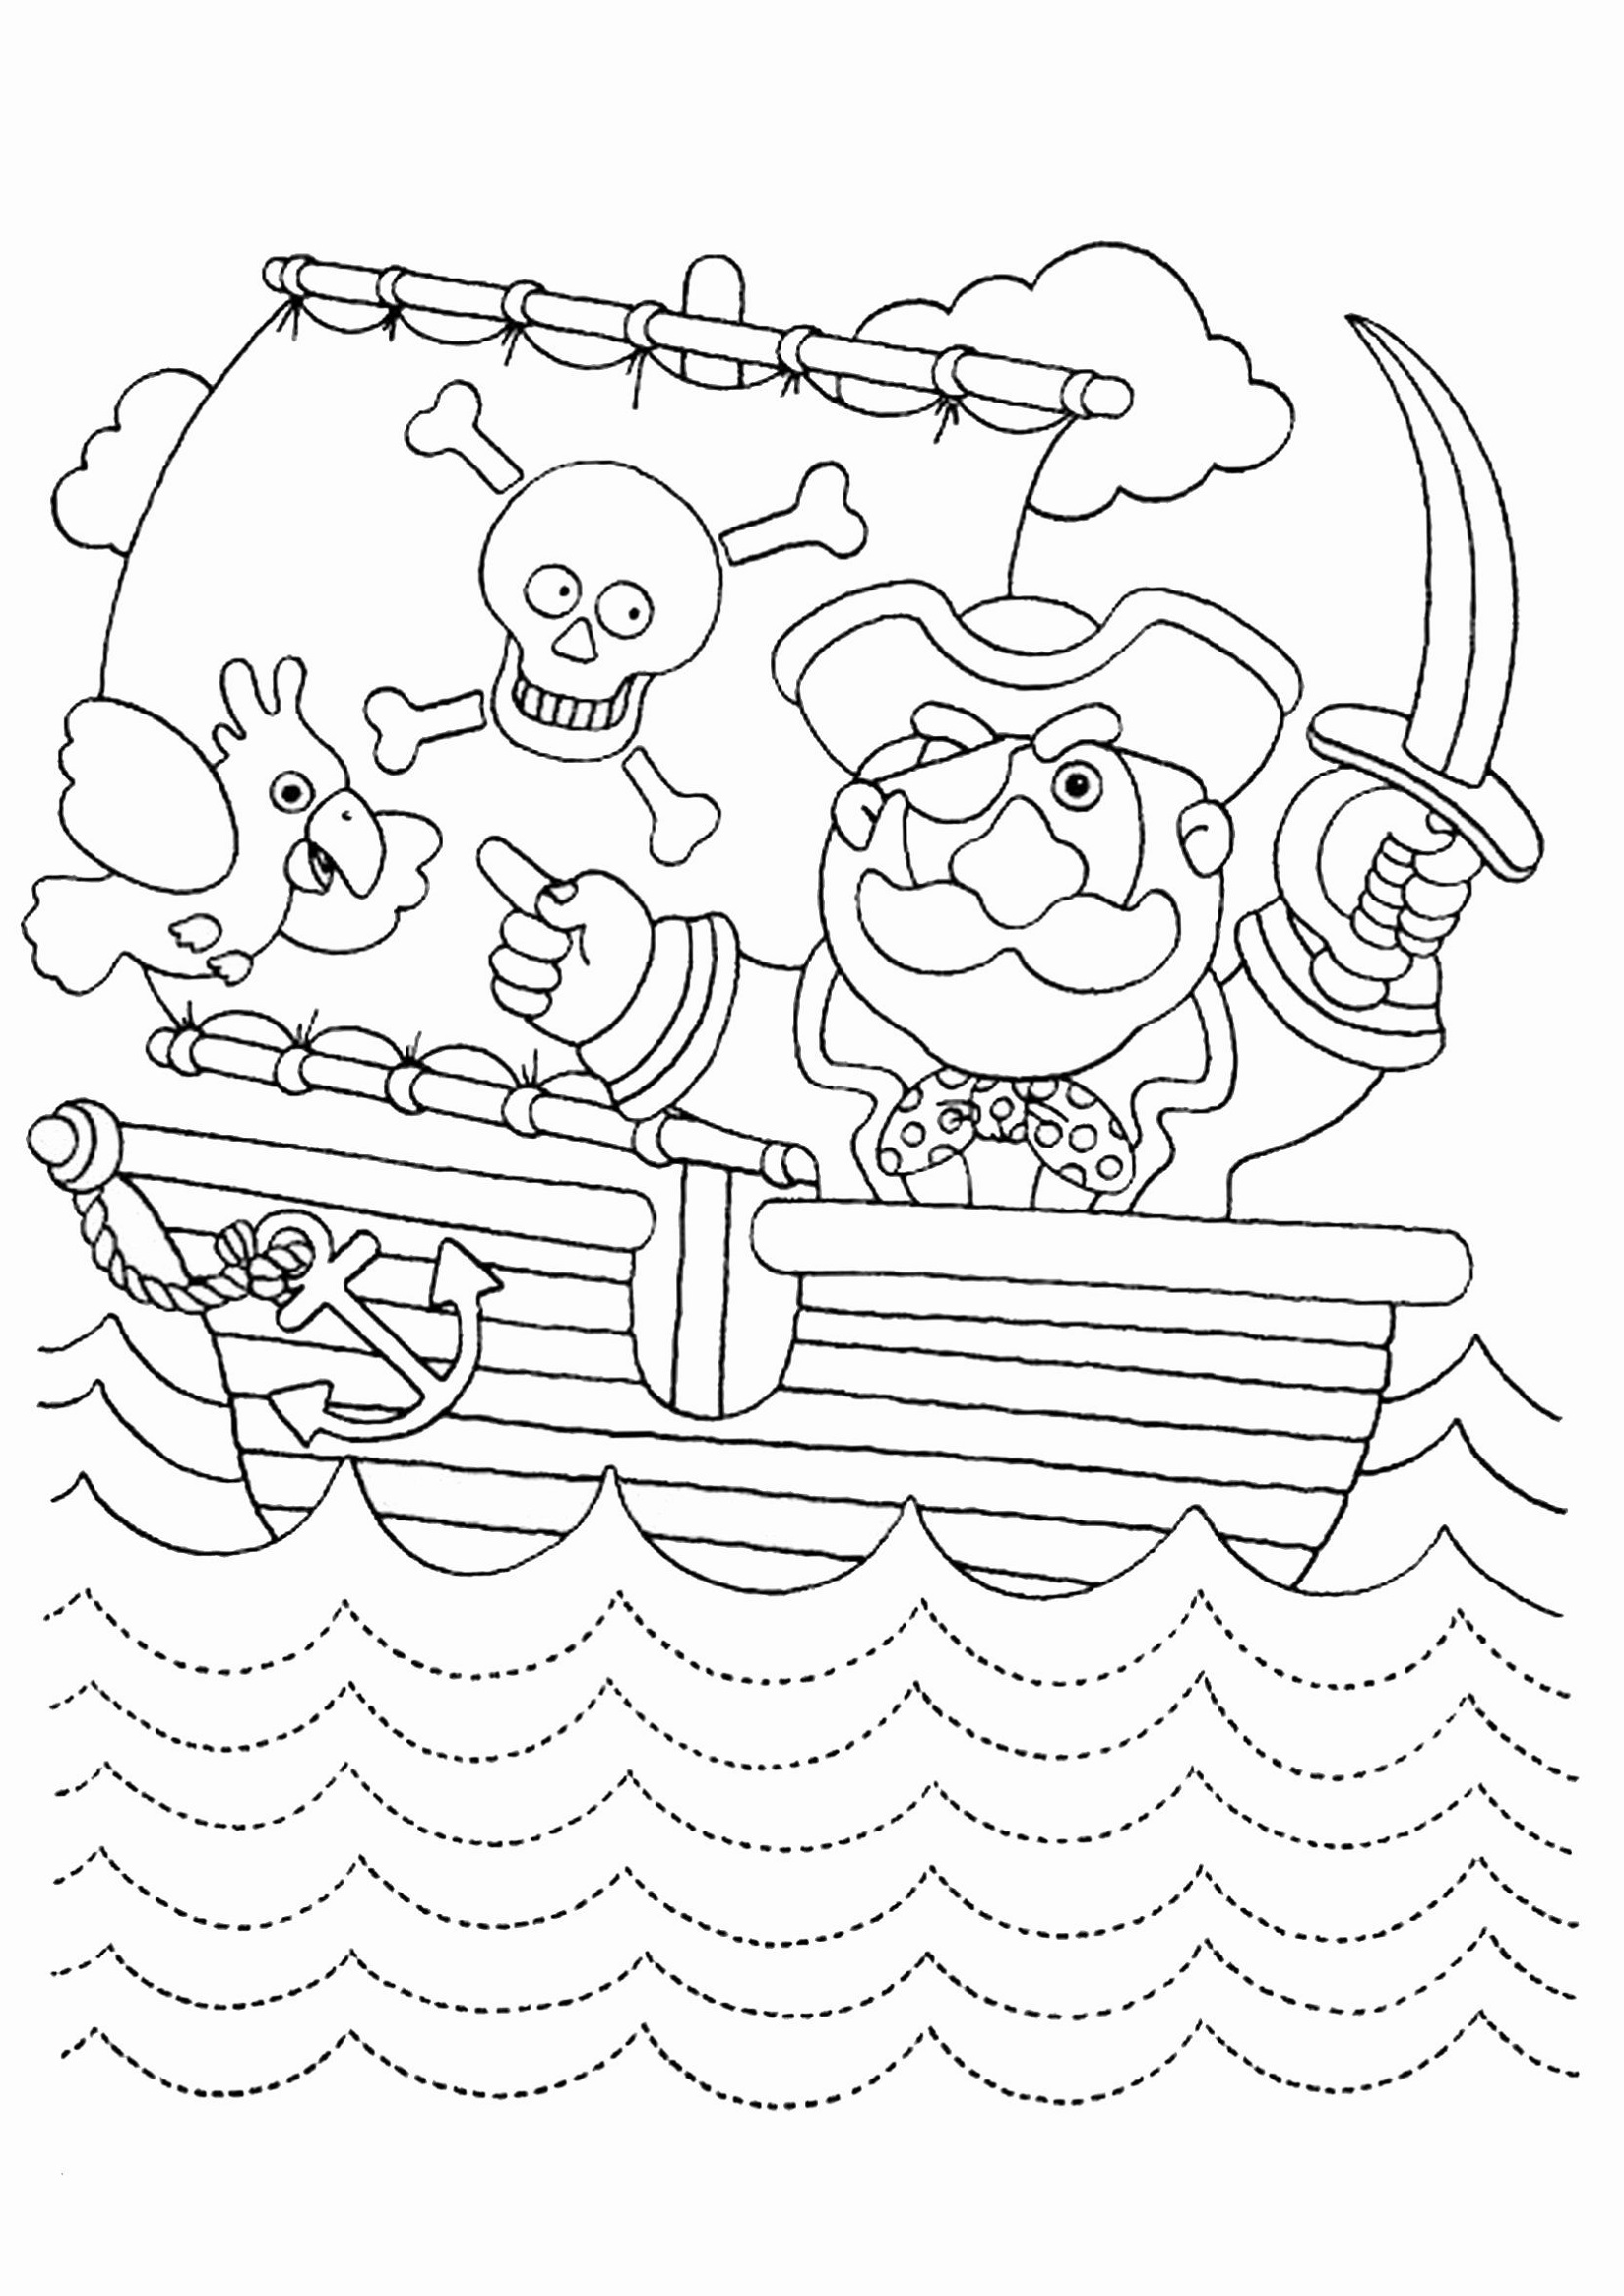 Educational Coloring Pages For Kindergarten Pirate